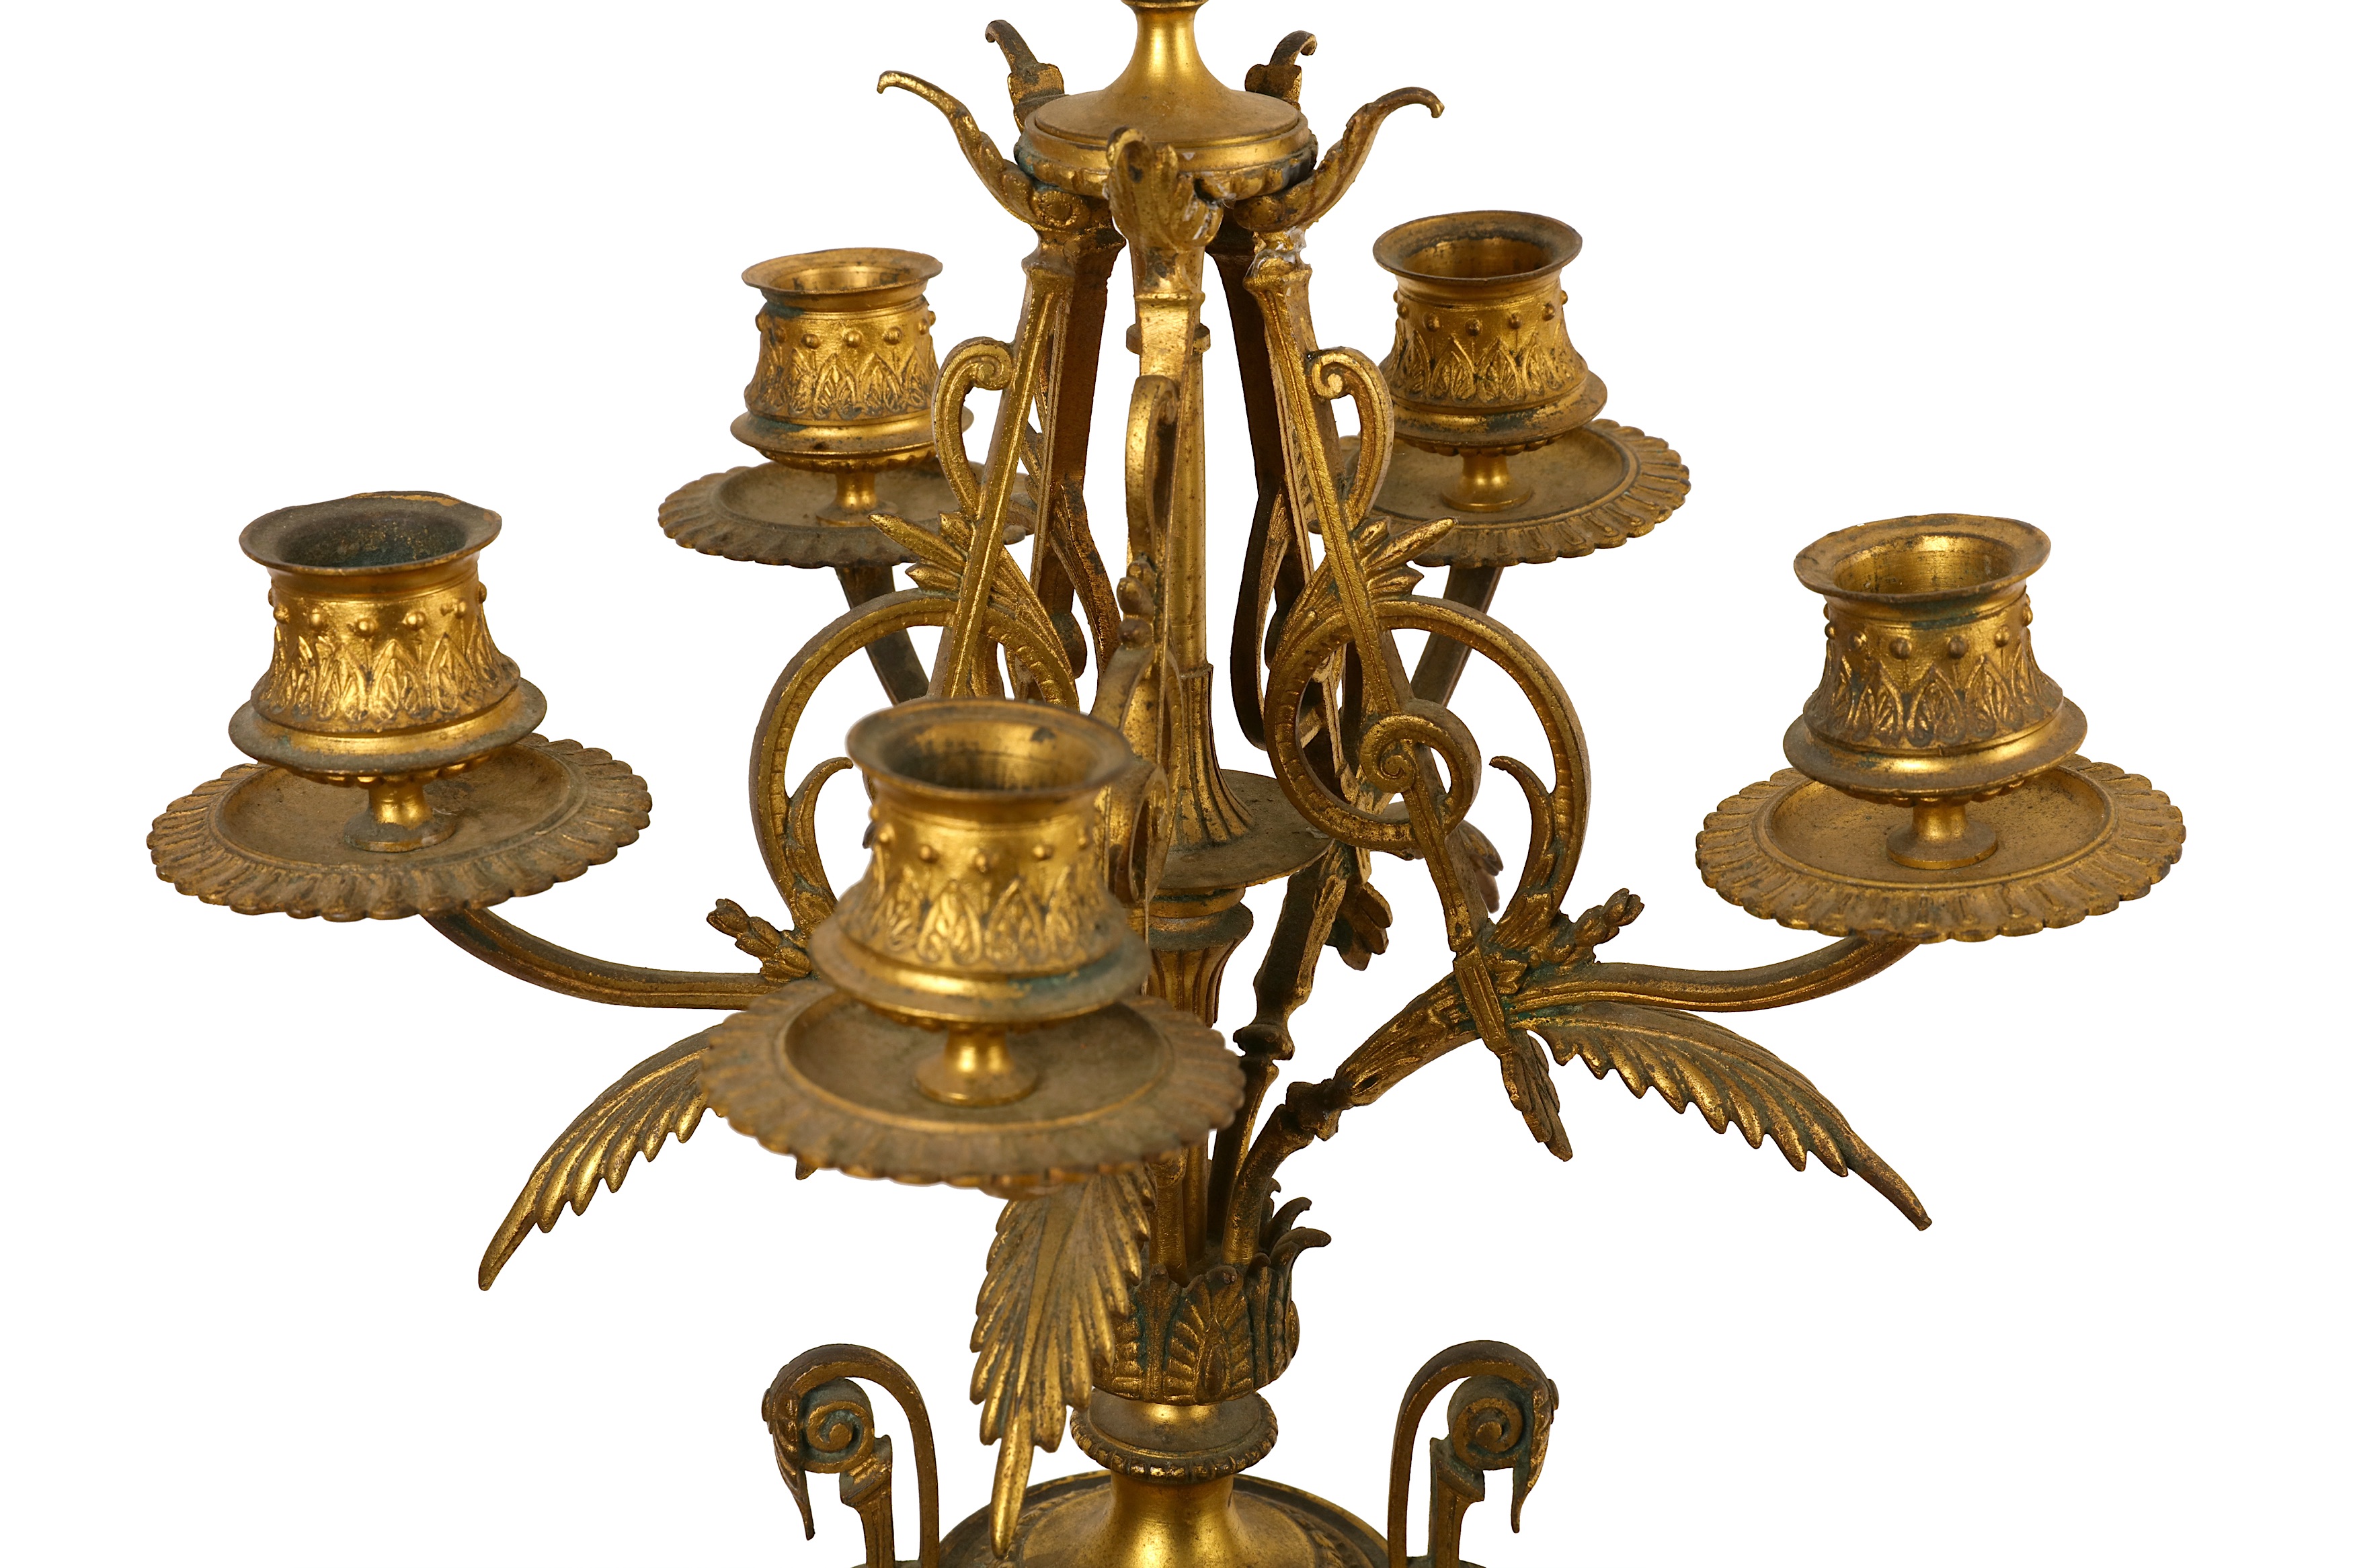 A PAIR OF LATE 19TH CENTURY FRENCH GILT METAL AND BRECCIA MARBLE CANDELABRA in the Neo-Grec style, - Image 7 of 7